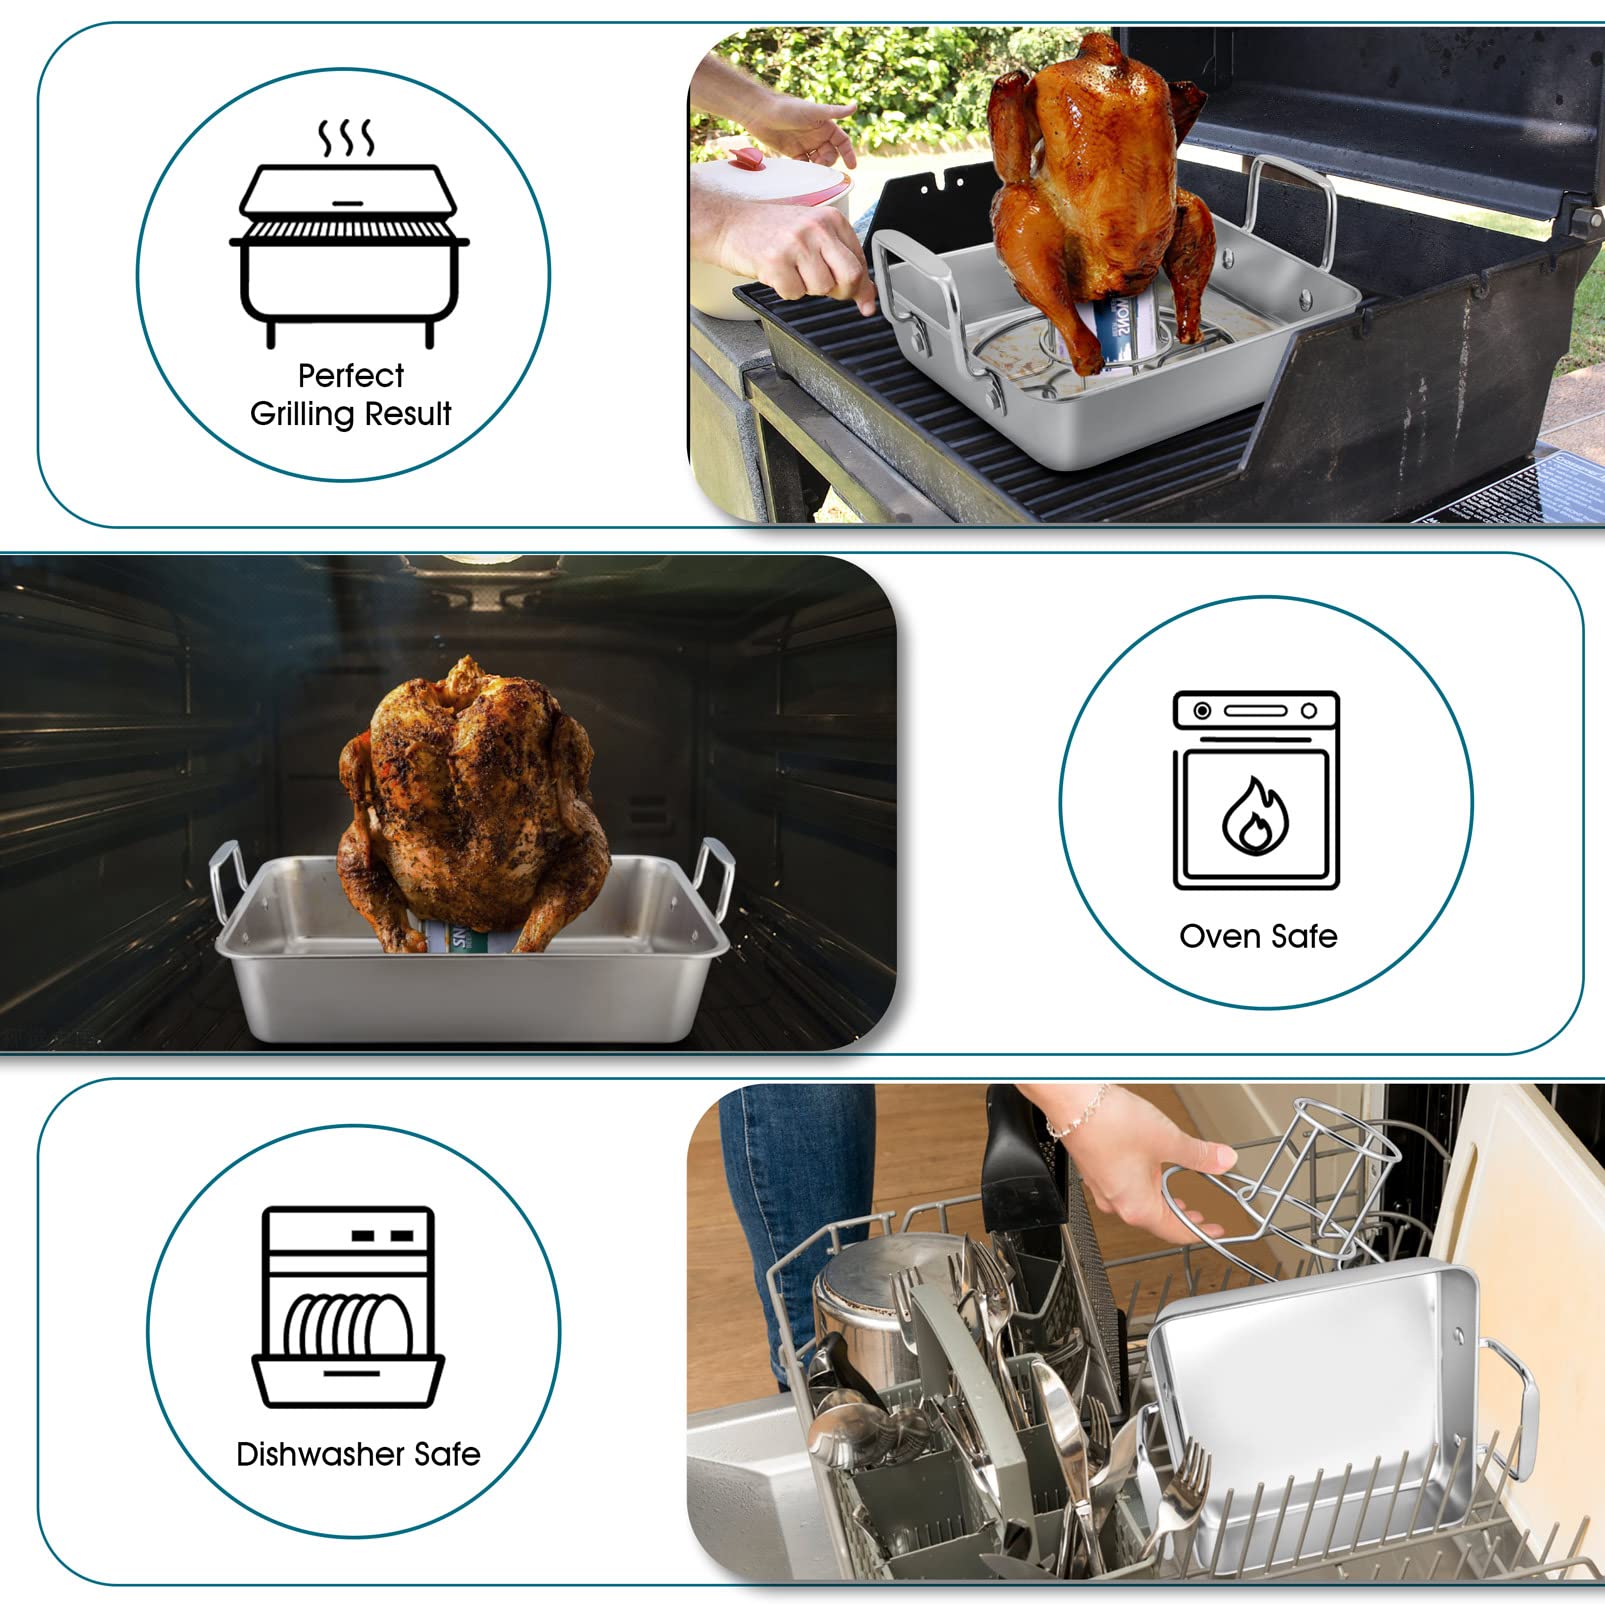 TeamFar Roasting Pan with Beer Can Chicken Holder, Stainless Steel Drip Pan with Vertical Rack Stand for Grill Oven Smoker, Healthy & Heavy Duty, Easy Clean & Dishwasher Safe, (1 Pan + 1 Rack)